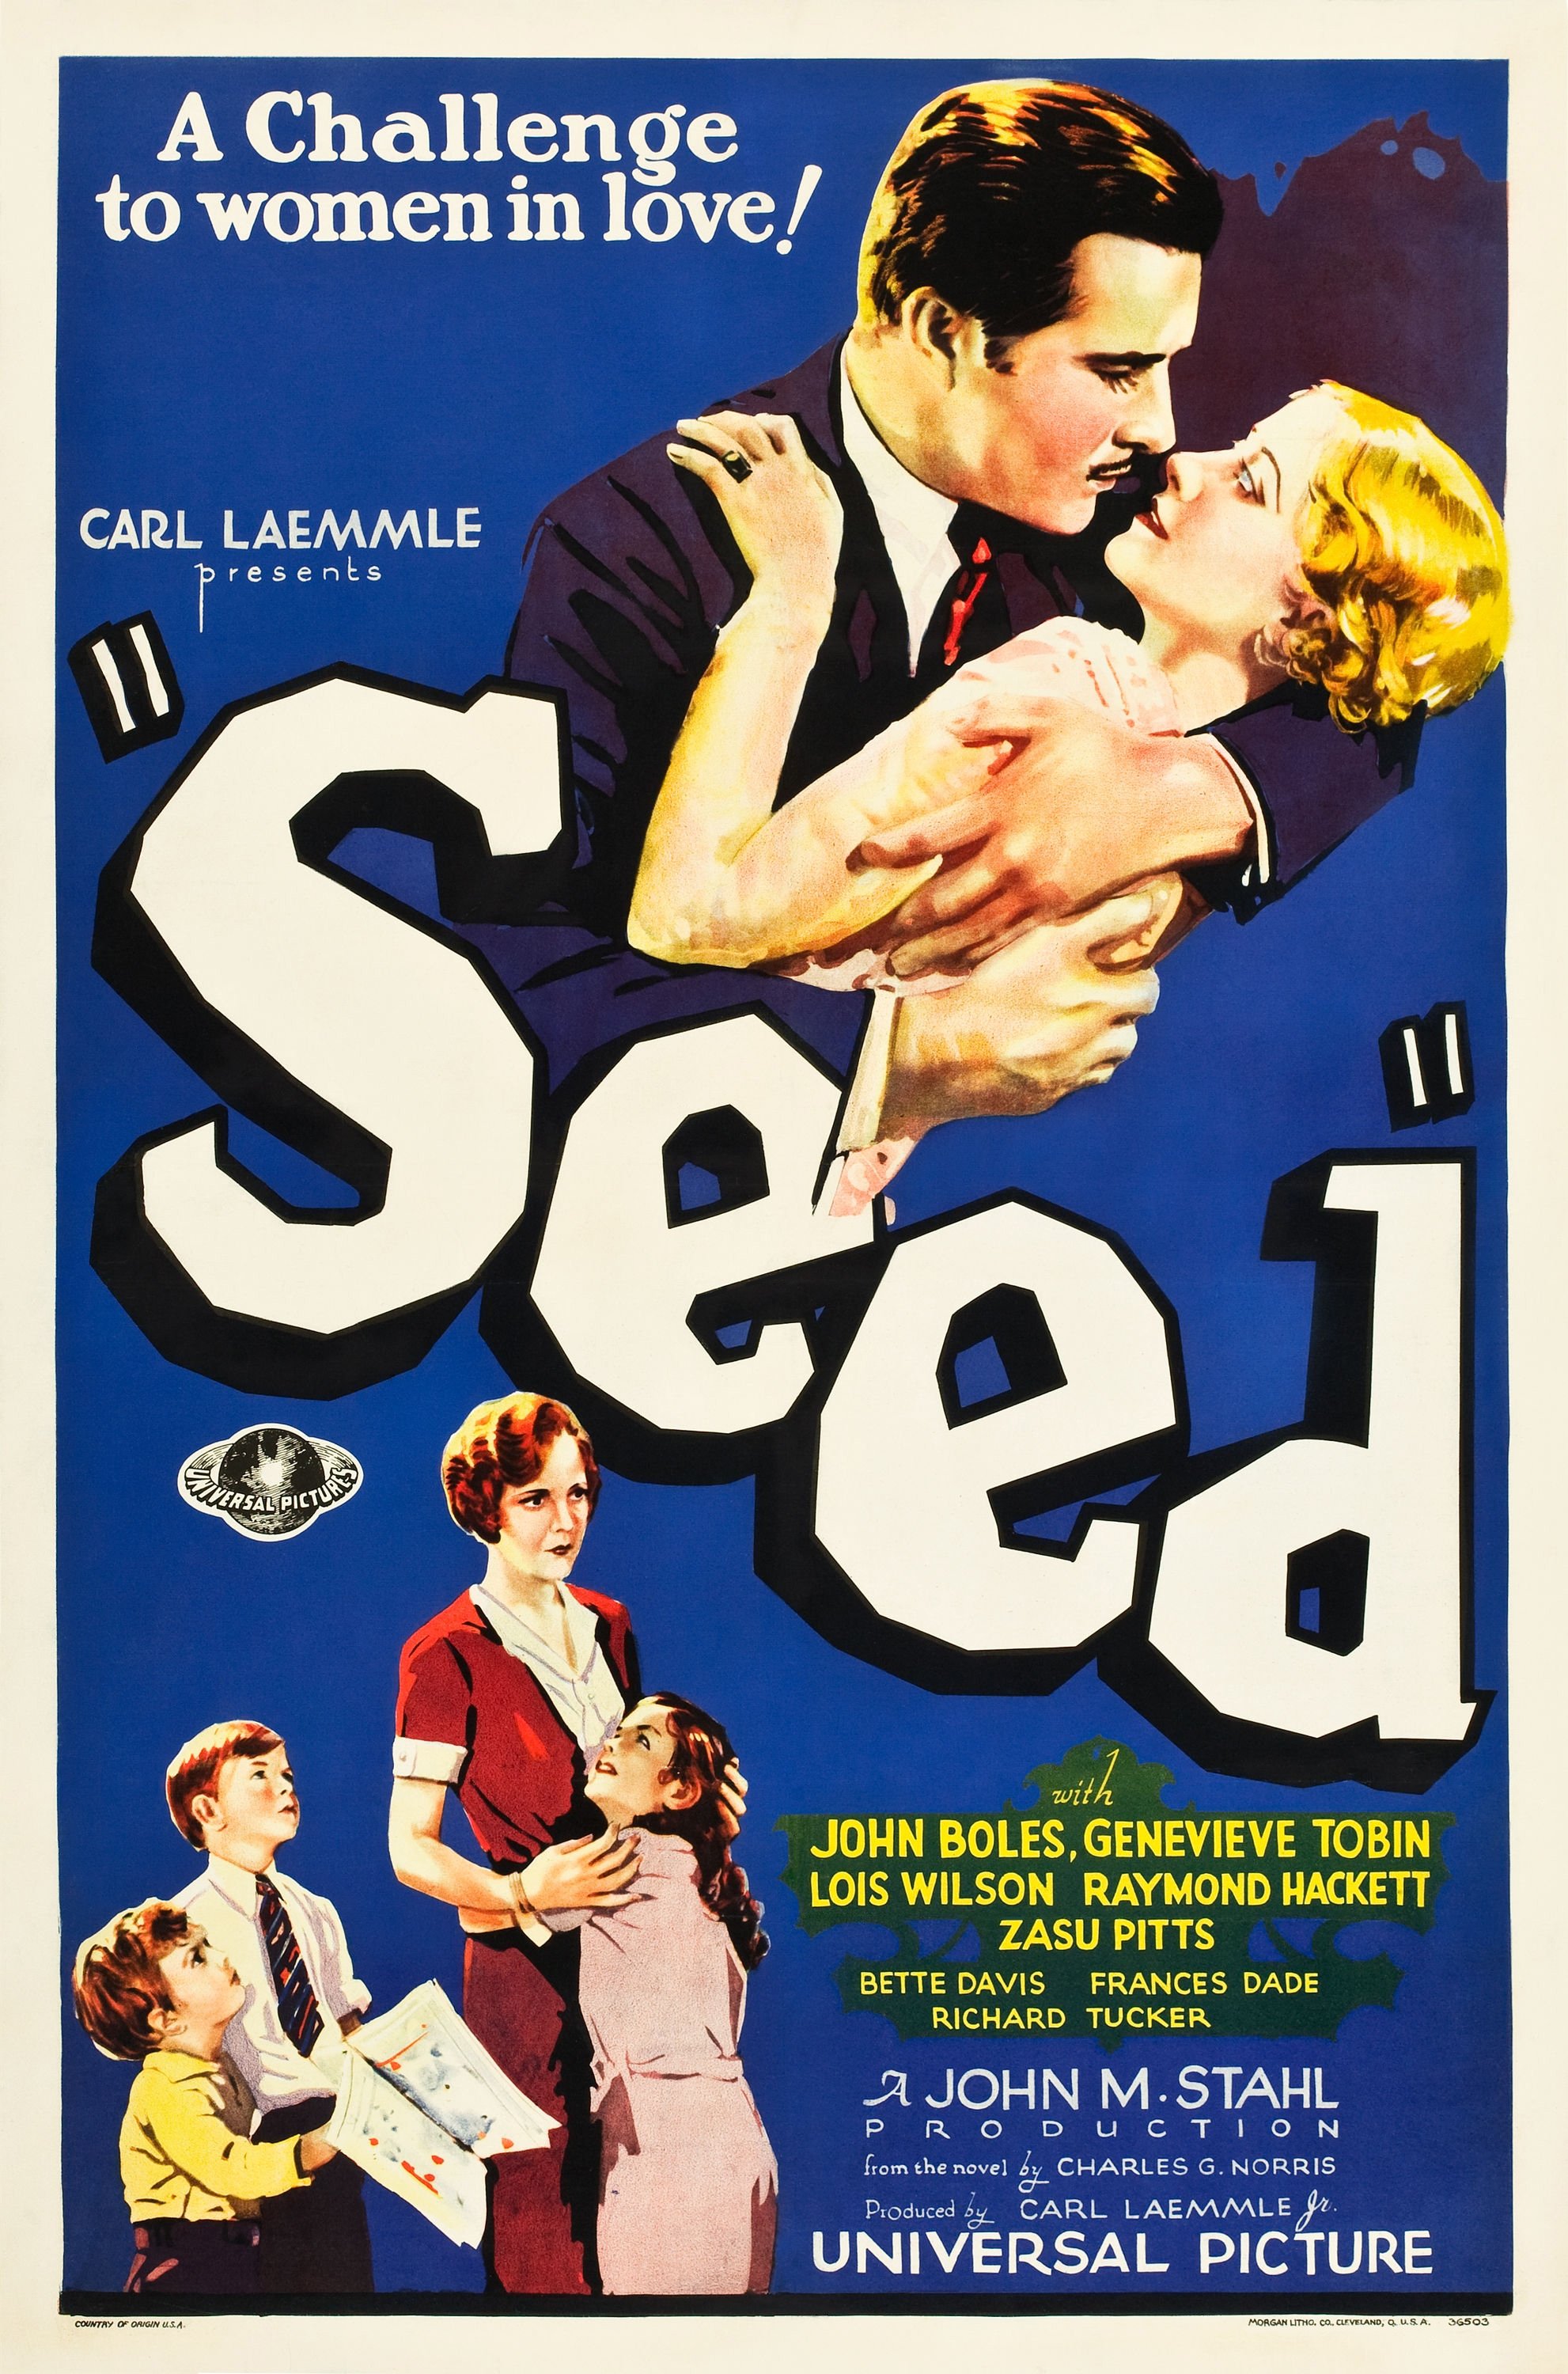 Poster of the movie Seed